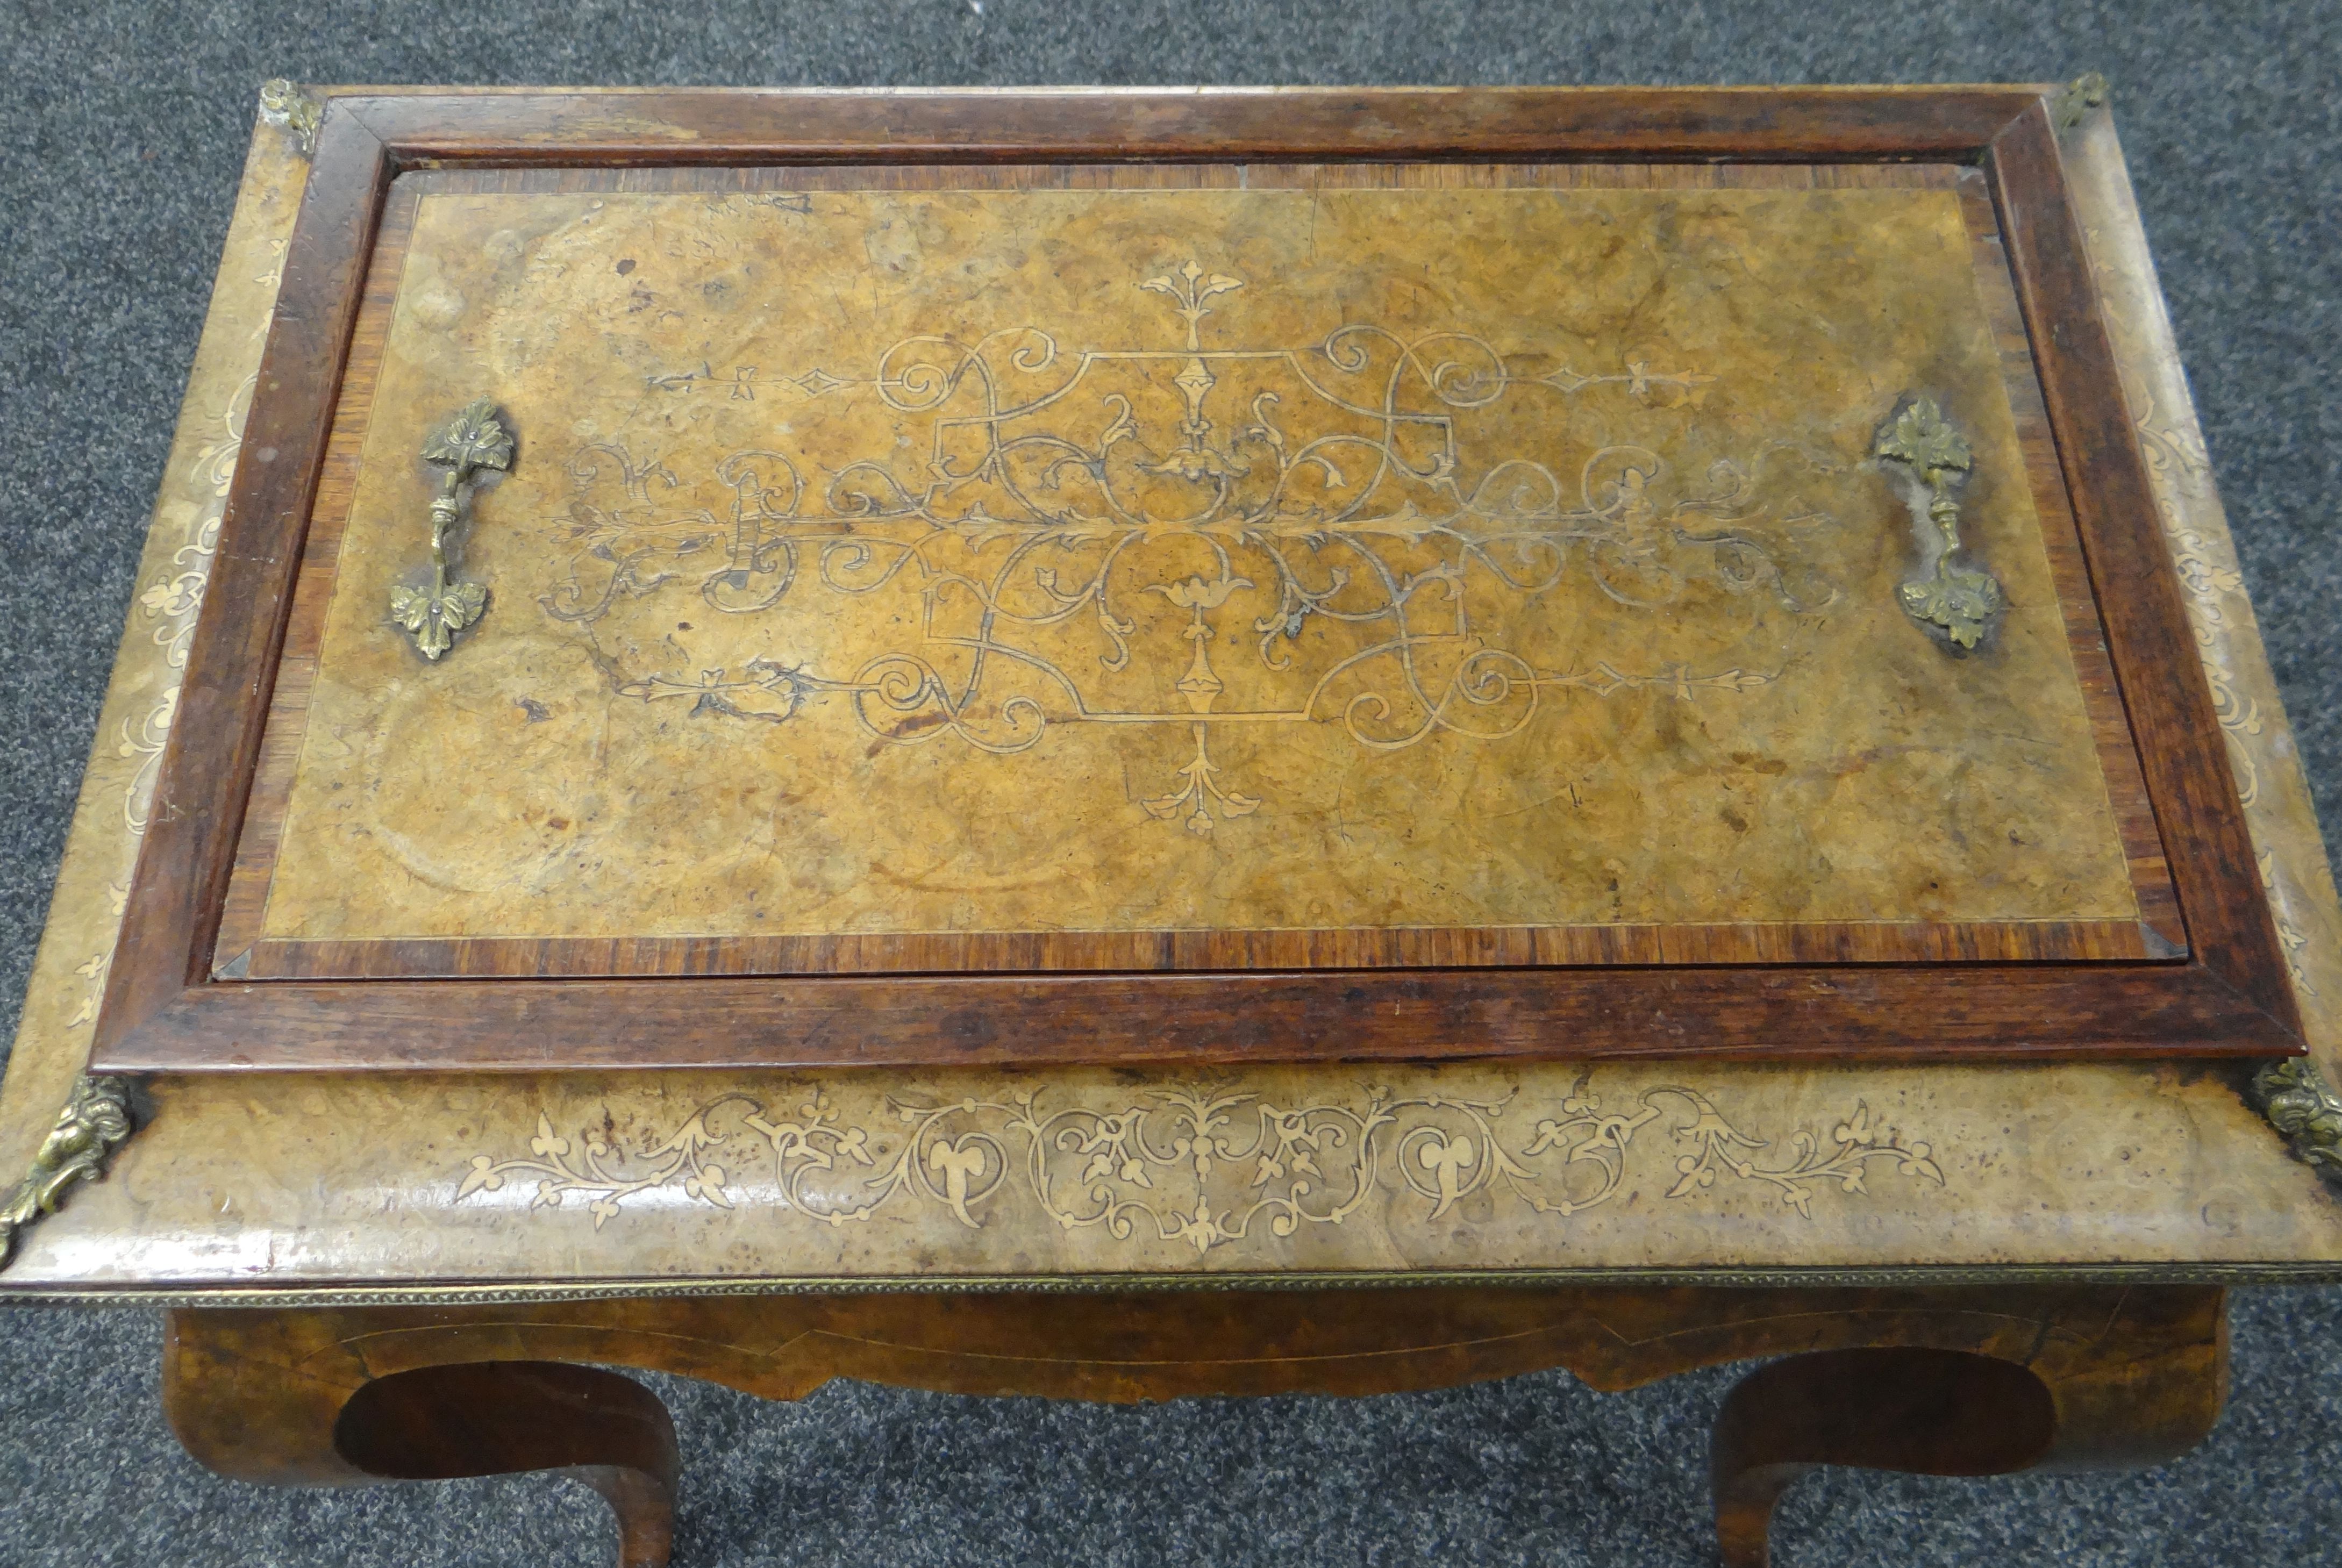 A NINETEENTH CENTURY MARQUETRY WALNUT SEWING TABLE with ormolu fittings and on shaped legs ( - Image 2 of 3